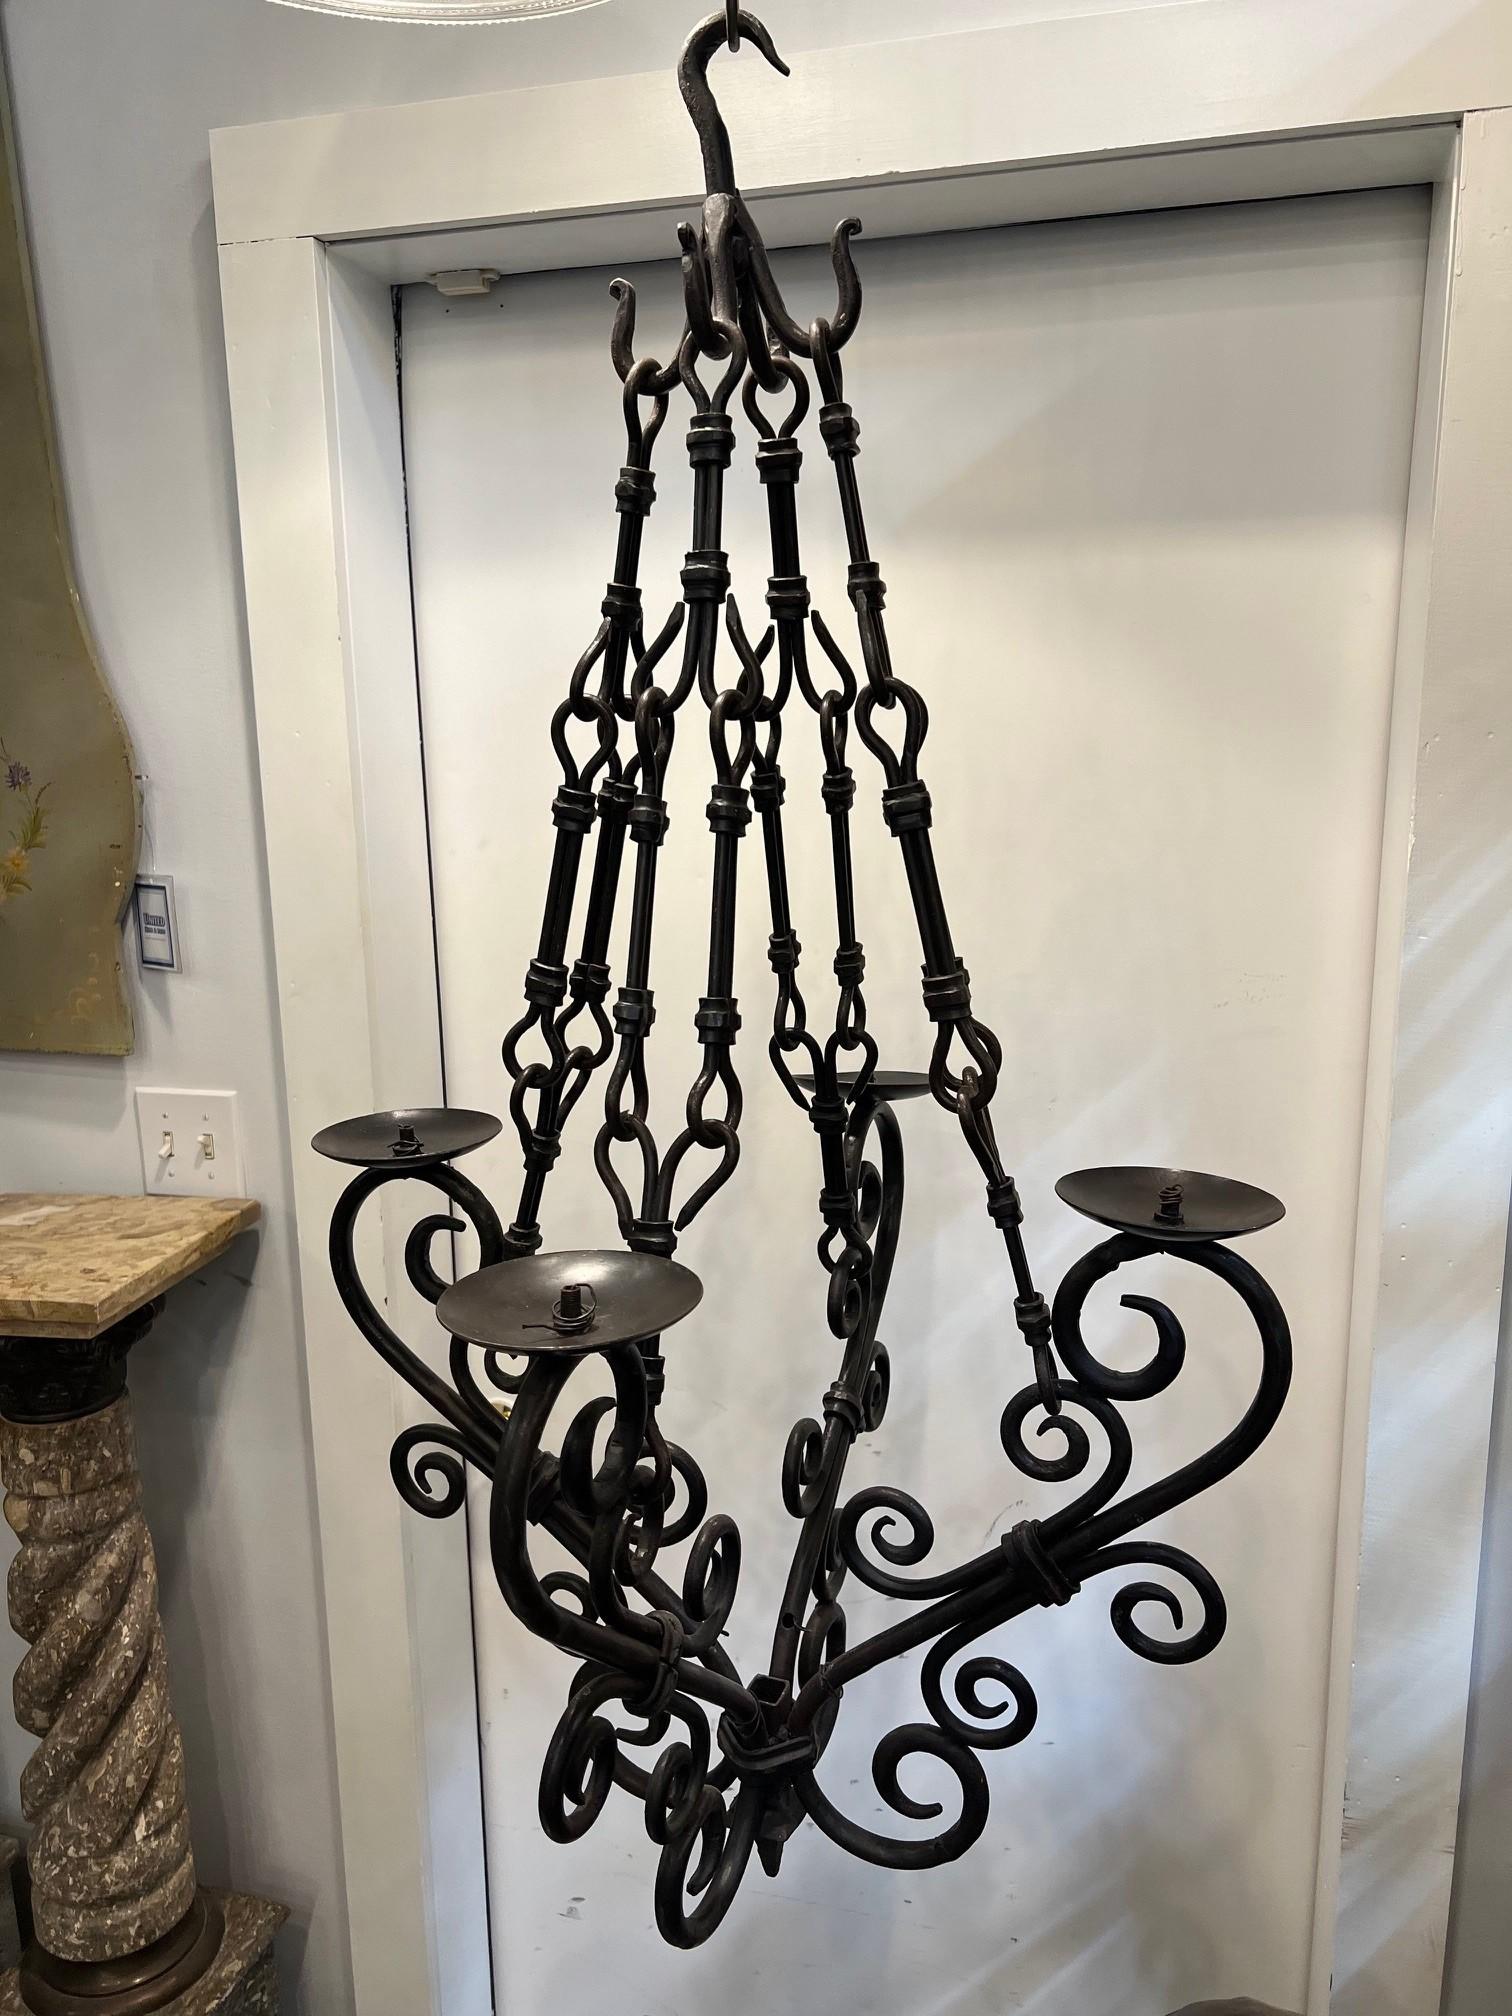 Beautiful decorative iron chandelier with four lights ready to be wired. Hand forged with curved arms and scrollwork, hanging from four hand forged bars attached to a large hook. It's a nice size and would look great in a kitchen or hanging in a